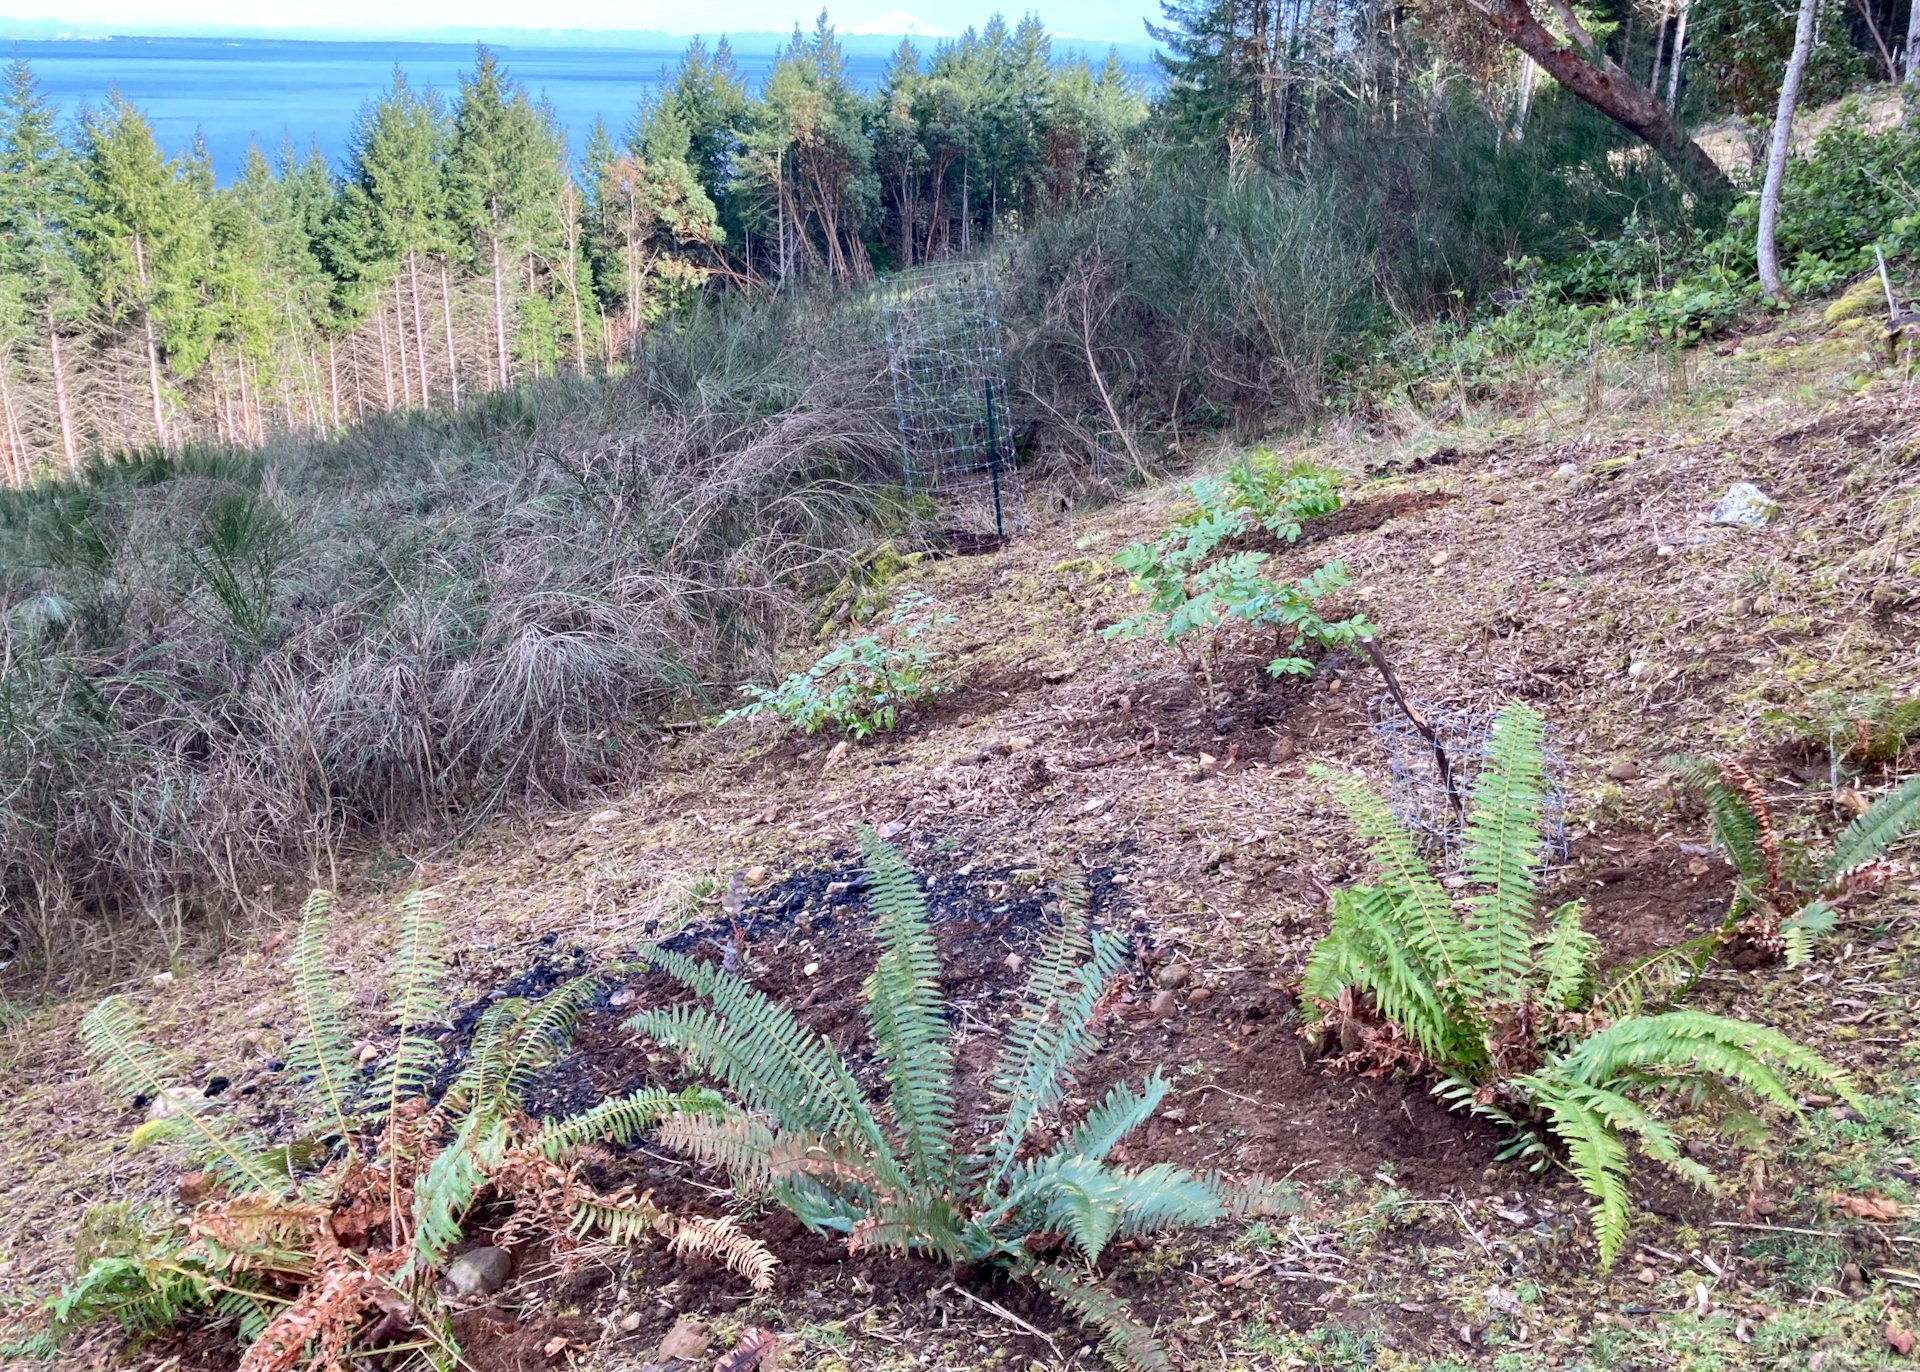  We also have been transplanting ferns, and hope that they will survive.  